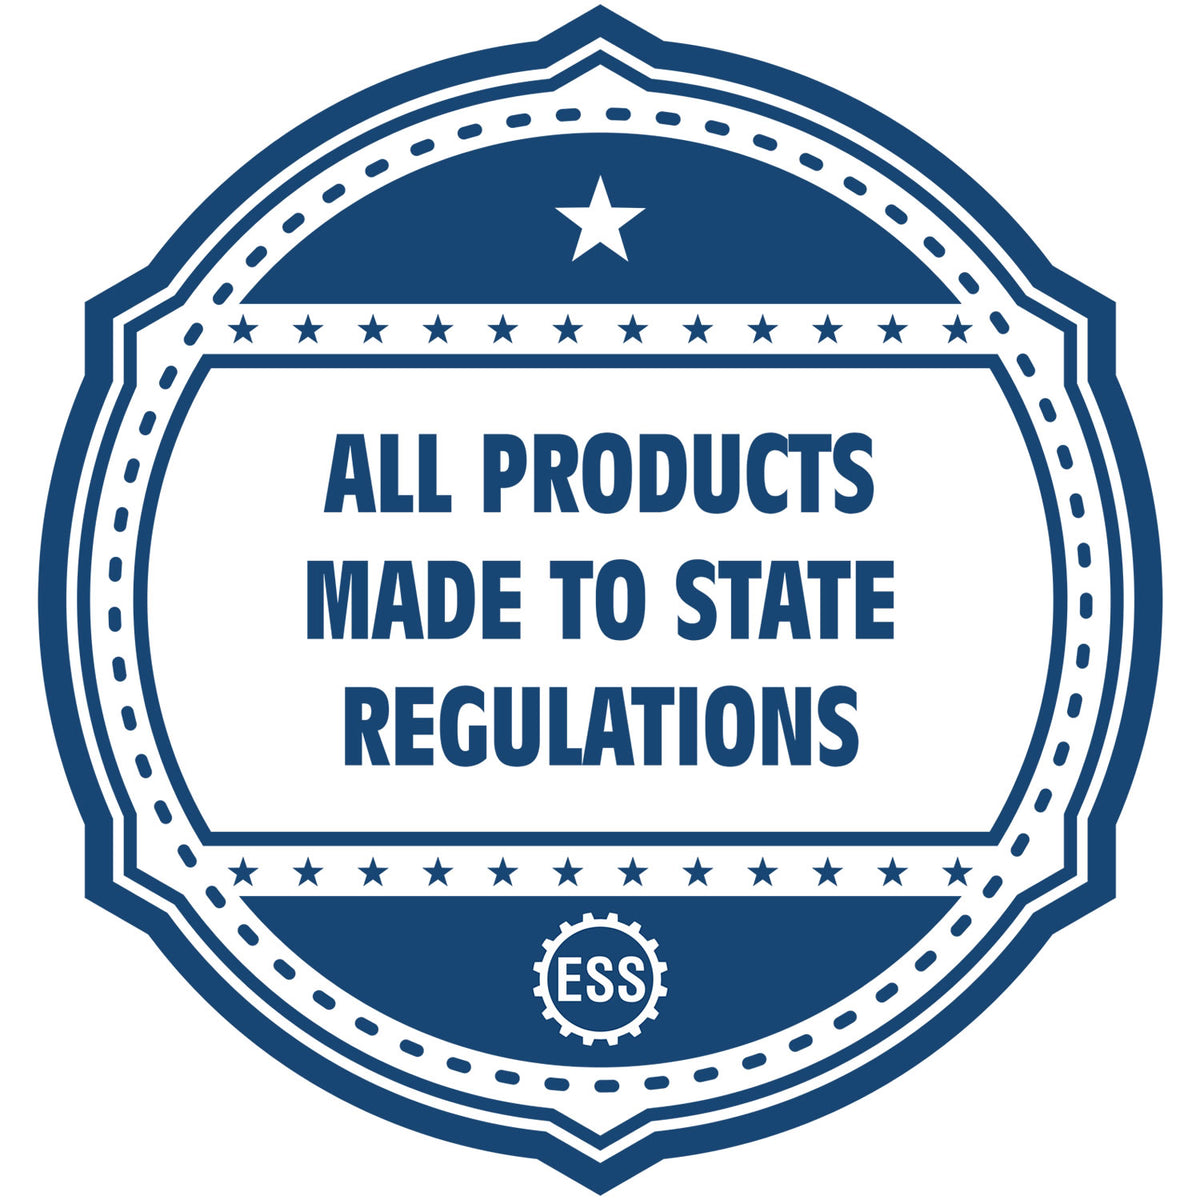 An icon or badge element for the Premium MaxLight Pre-Inked Maine Engineering Stamp showing that this product is made in compliance with state regulations.